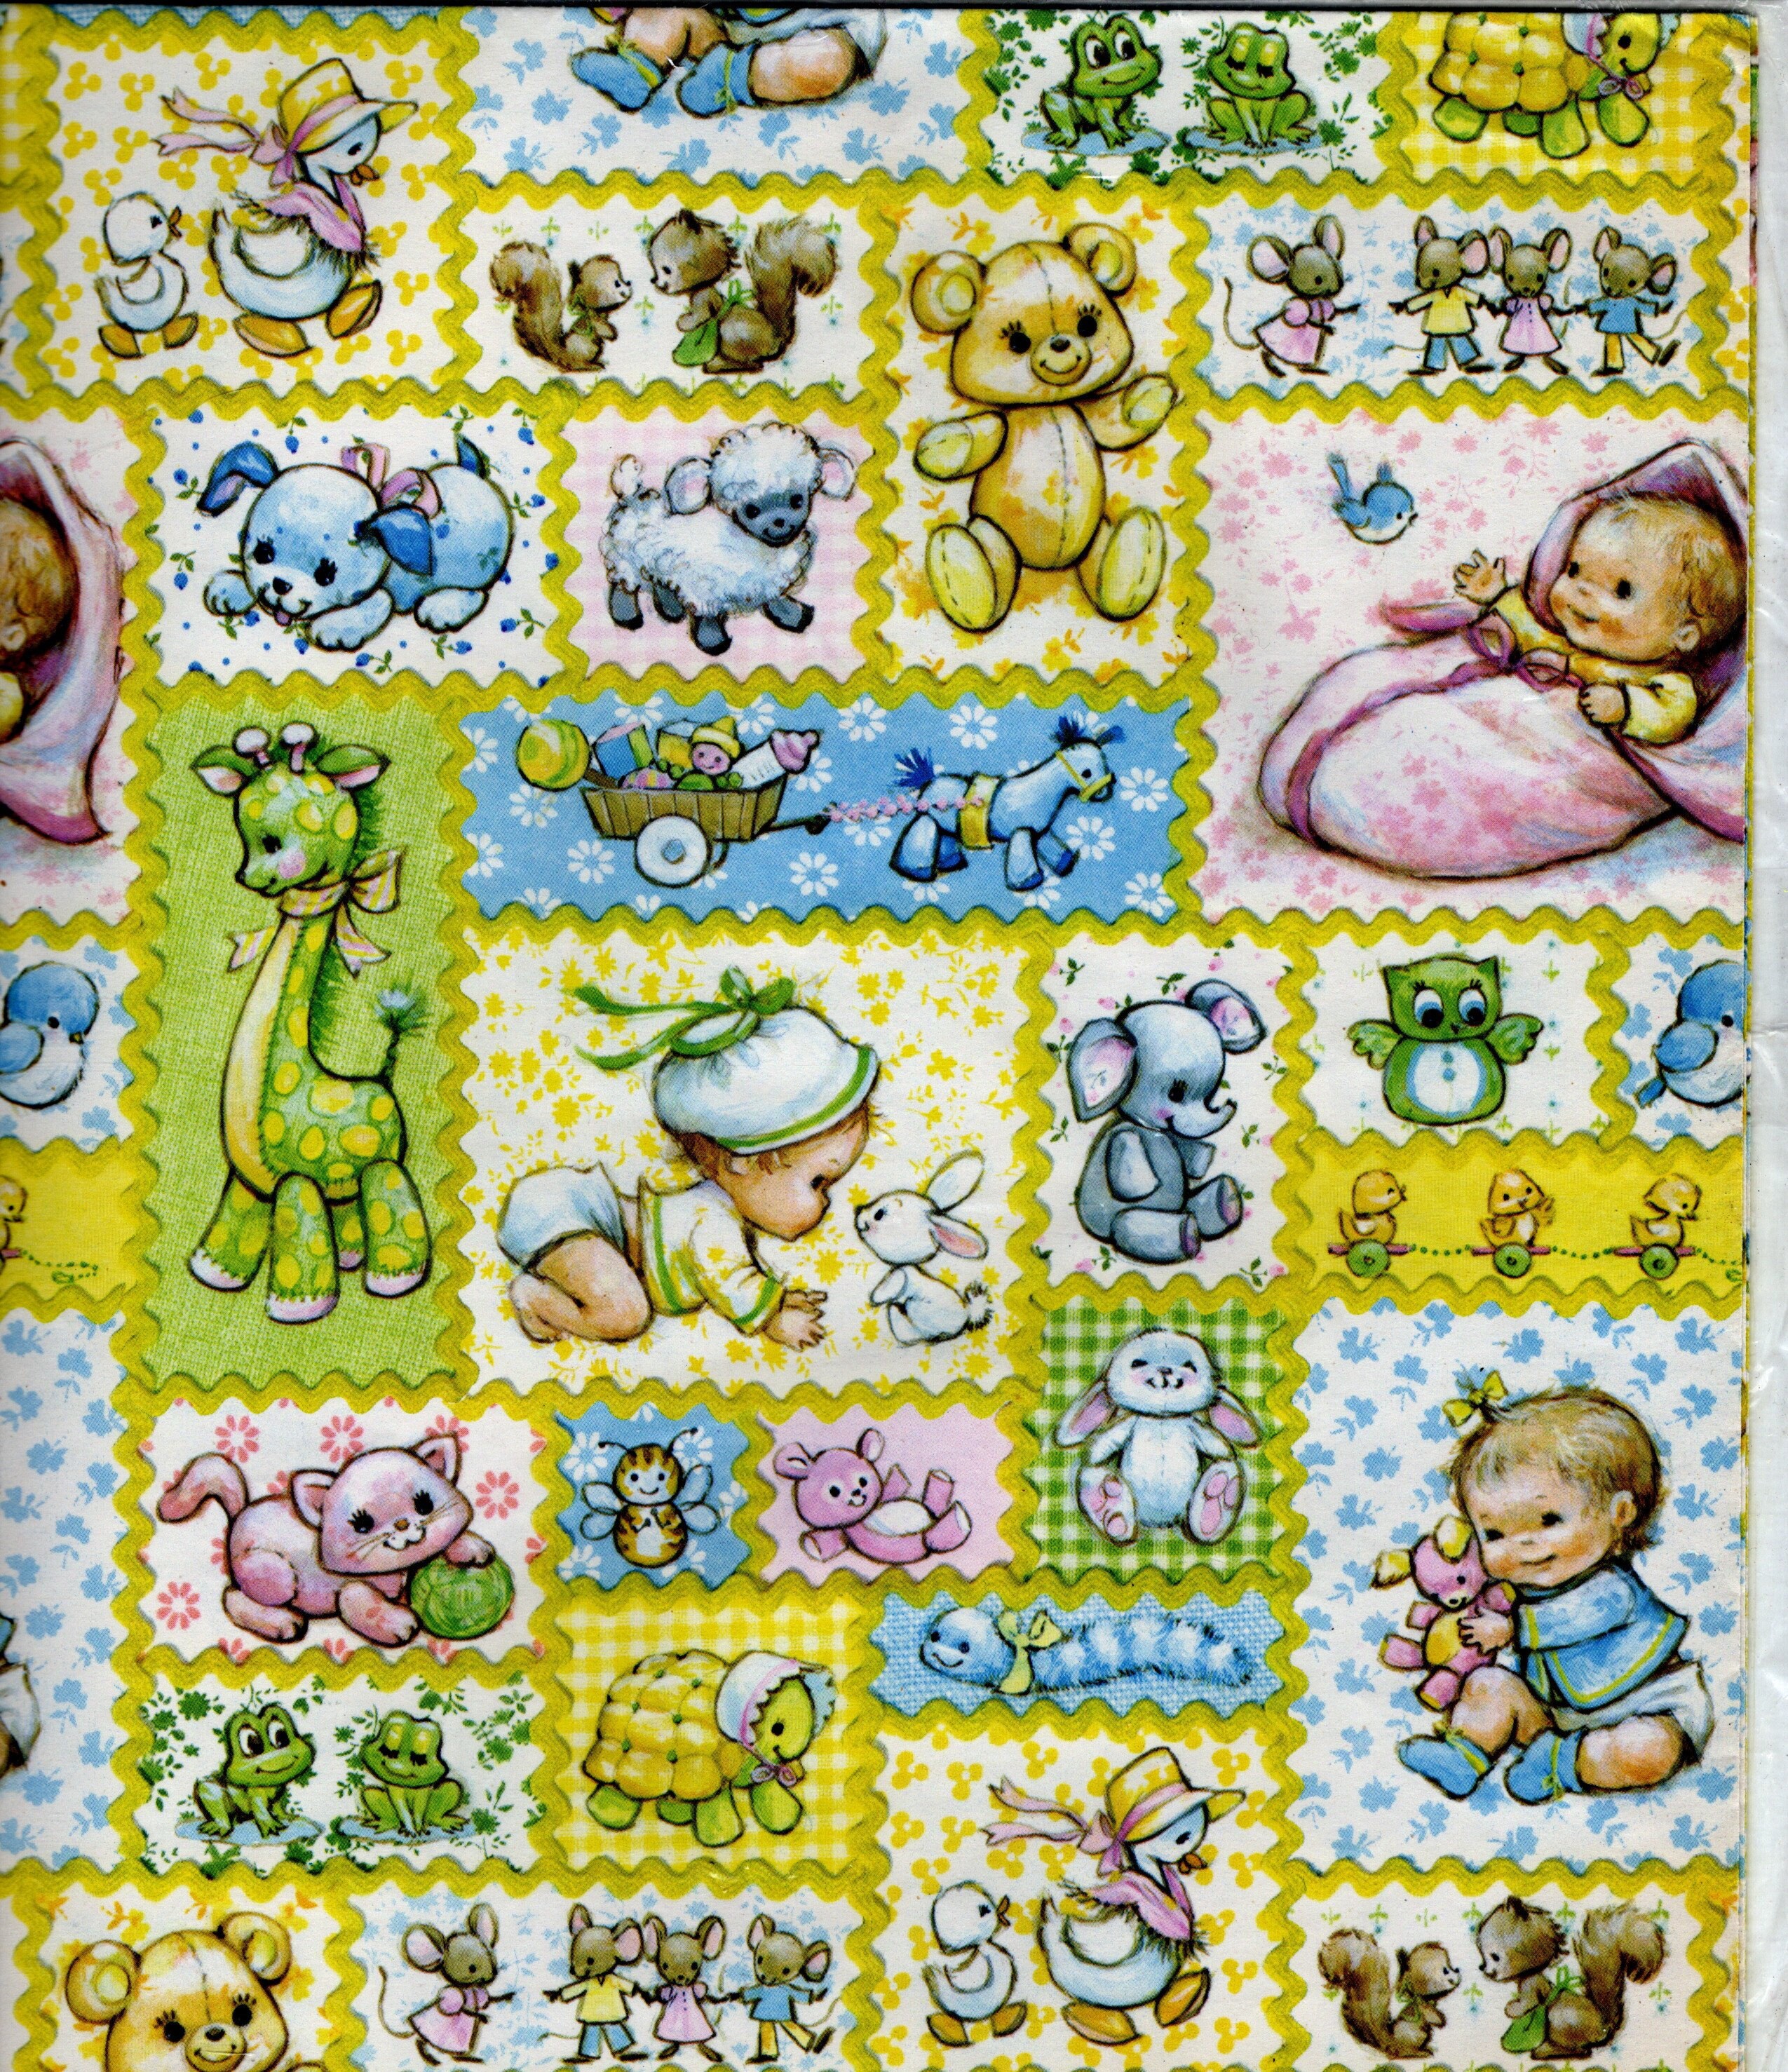 Gibson Vintage Gift Wrapping Paper Baby Shower Two 20x30” Sheets 70's 60's